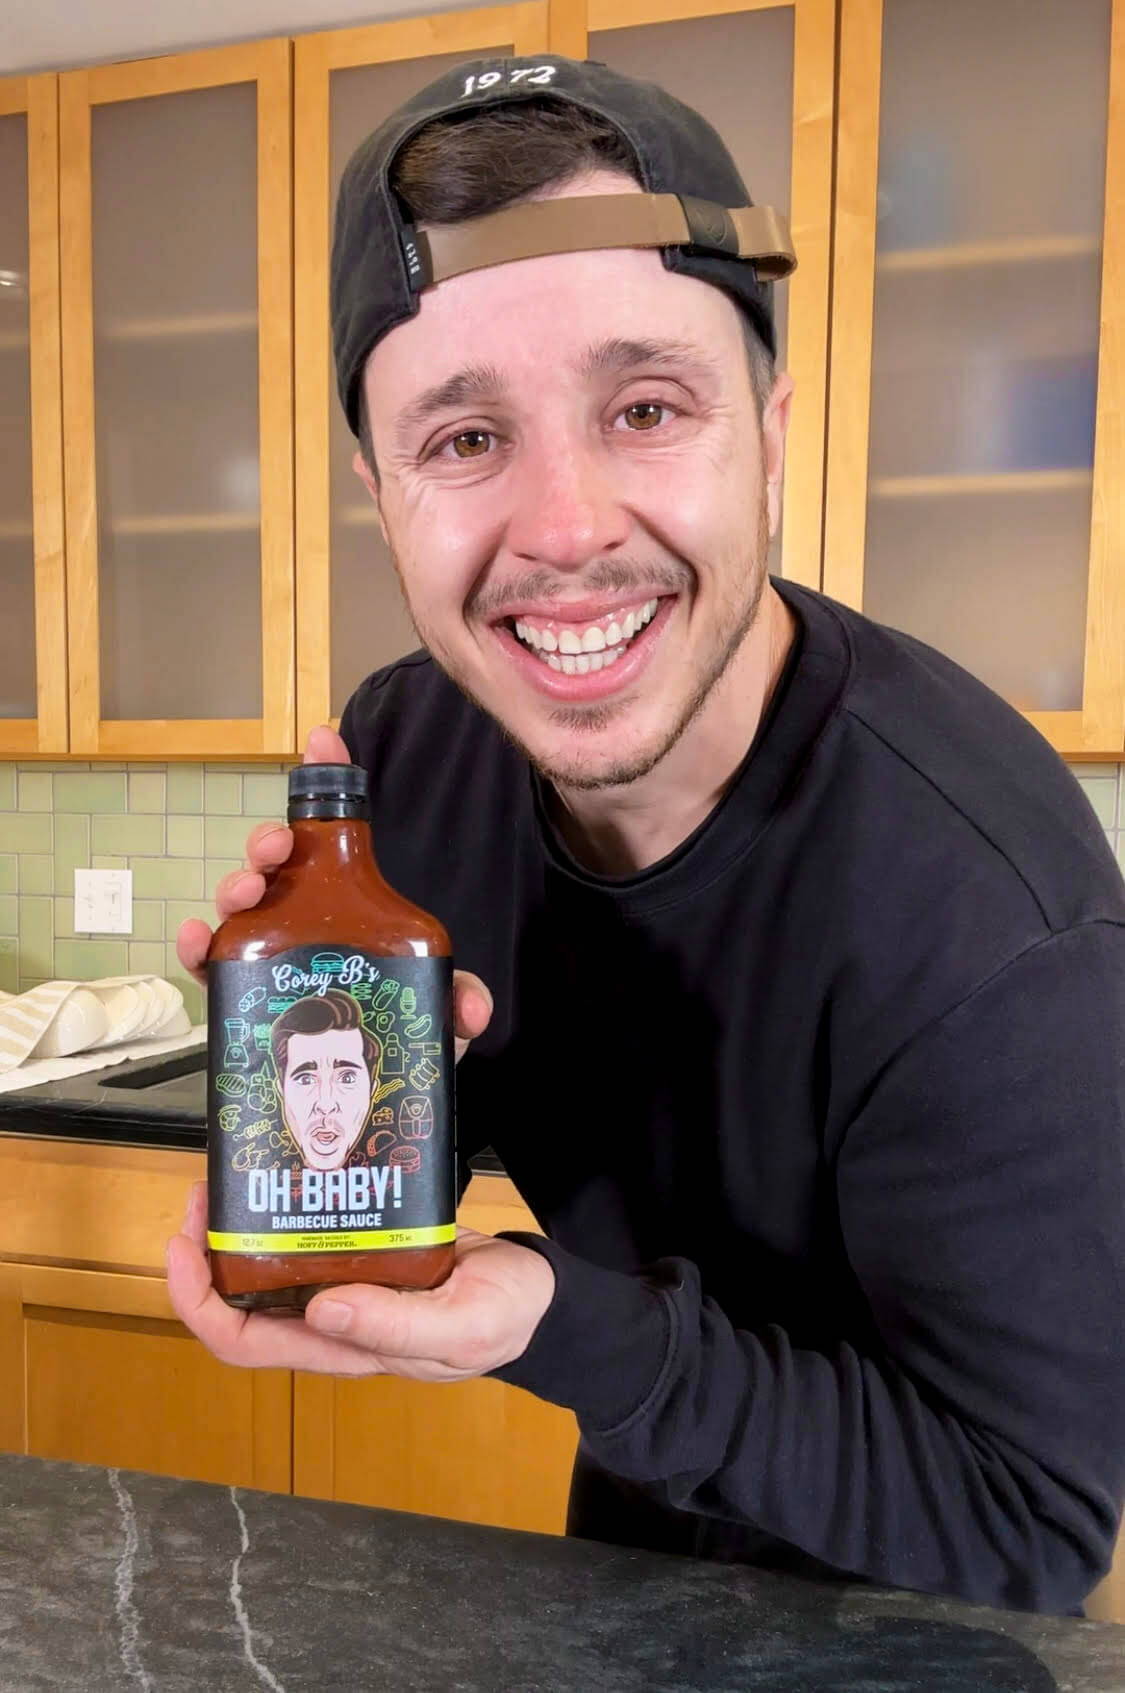 Unleash Maximum Flavor with Corey B's Oh Baby! Barbecue Sauce